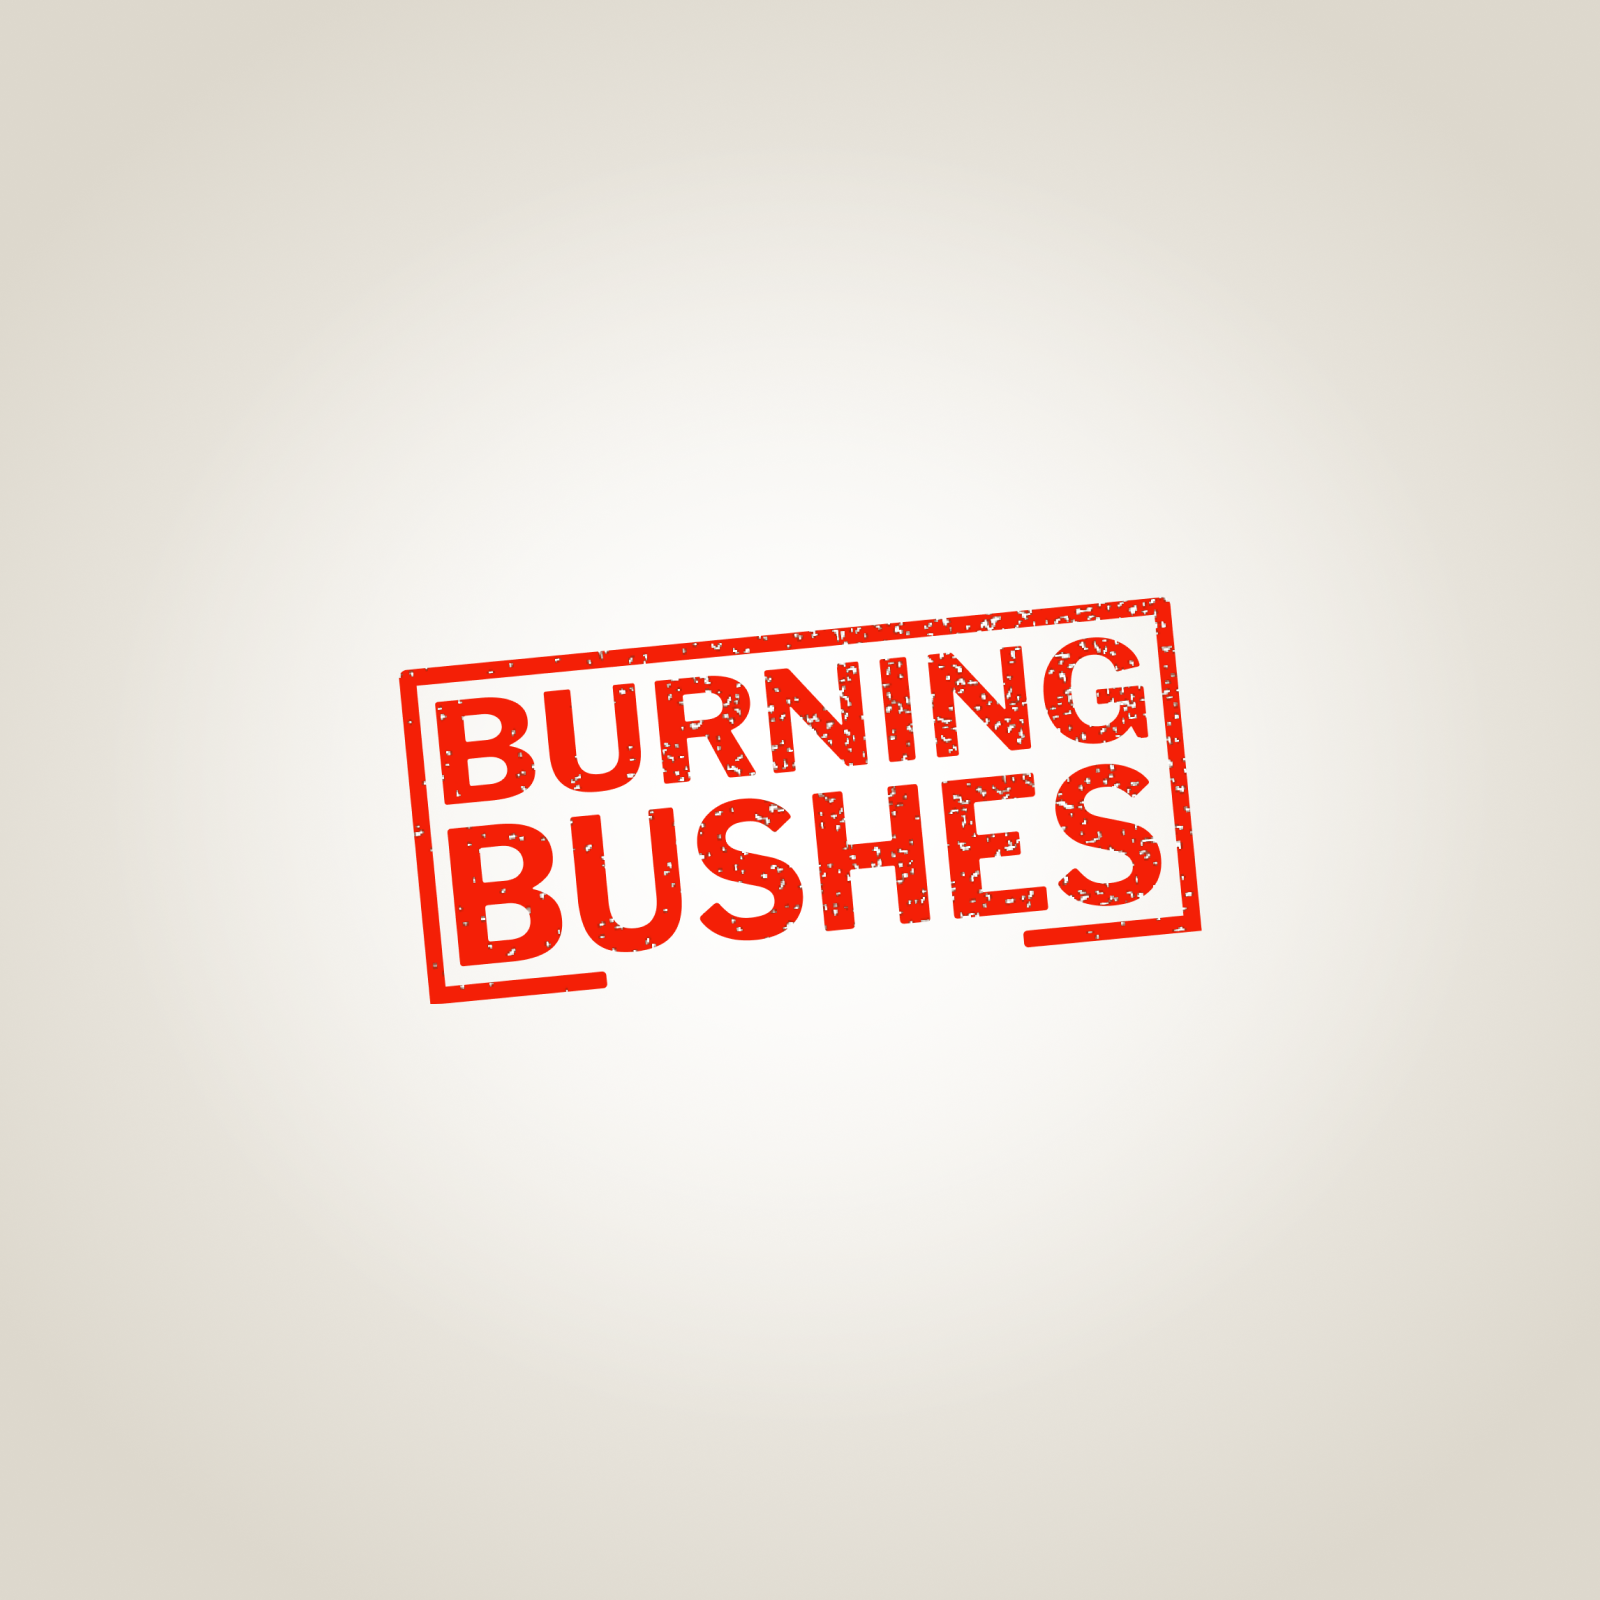 Burning Bushes, 10’s First Single, is Out Now